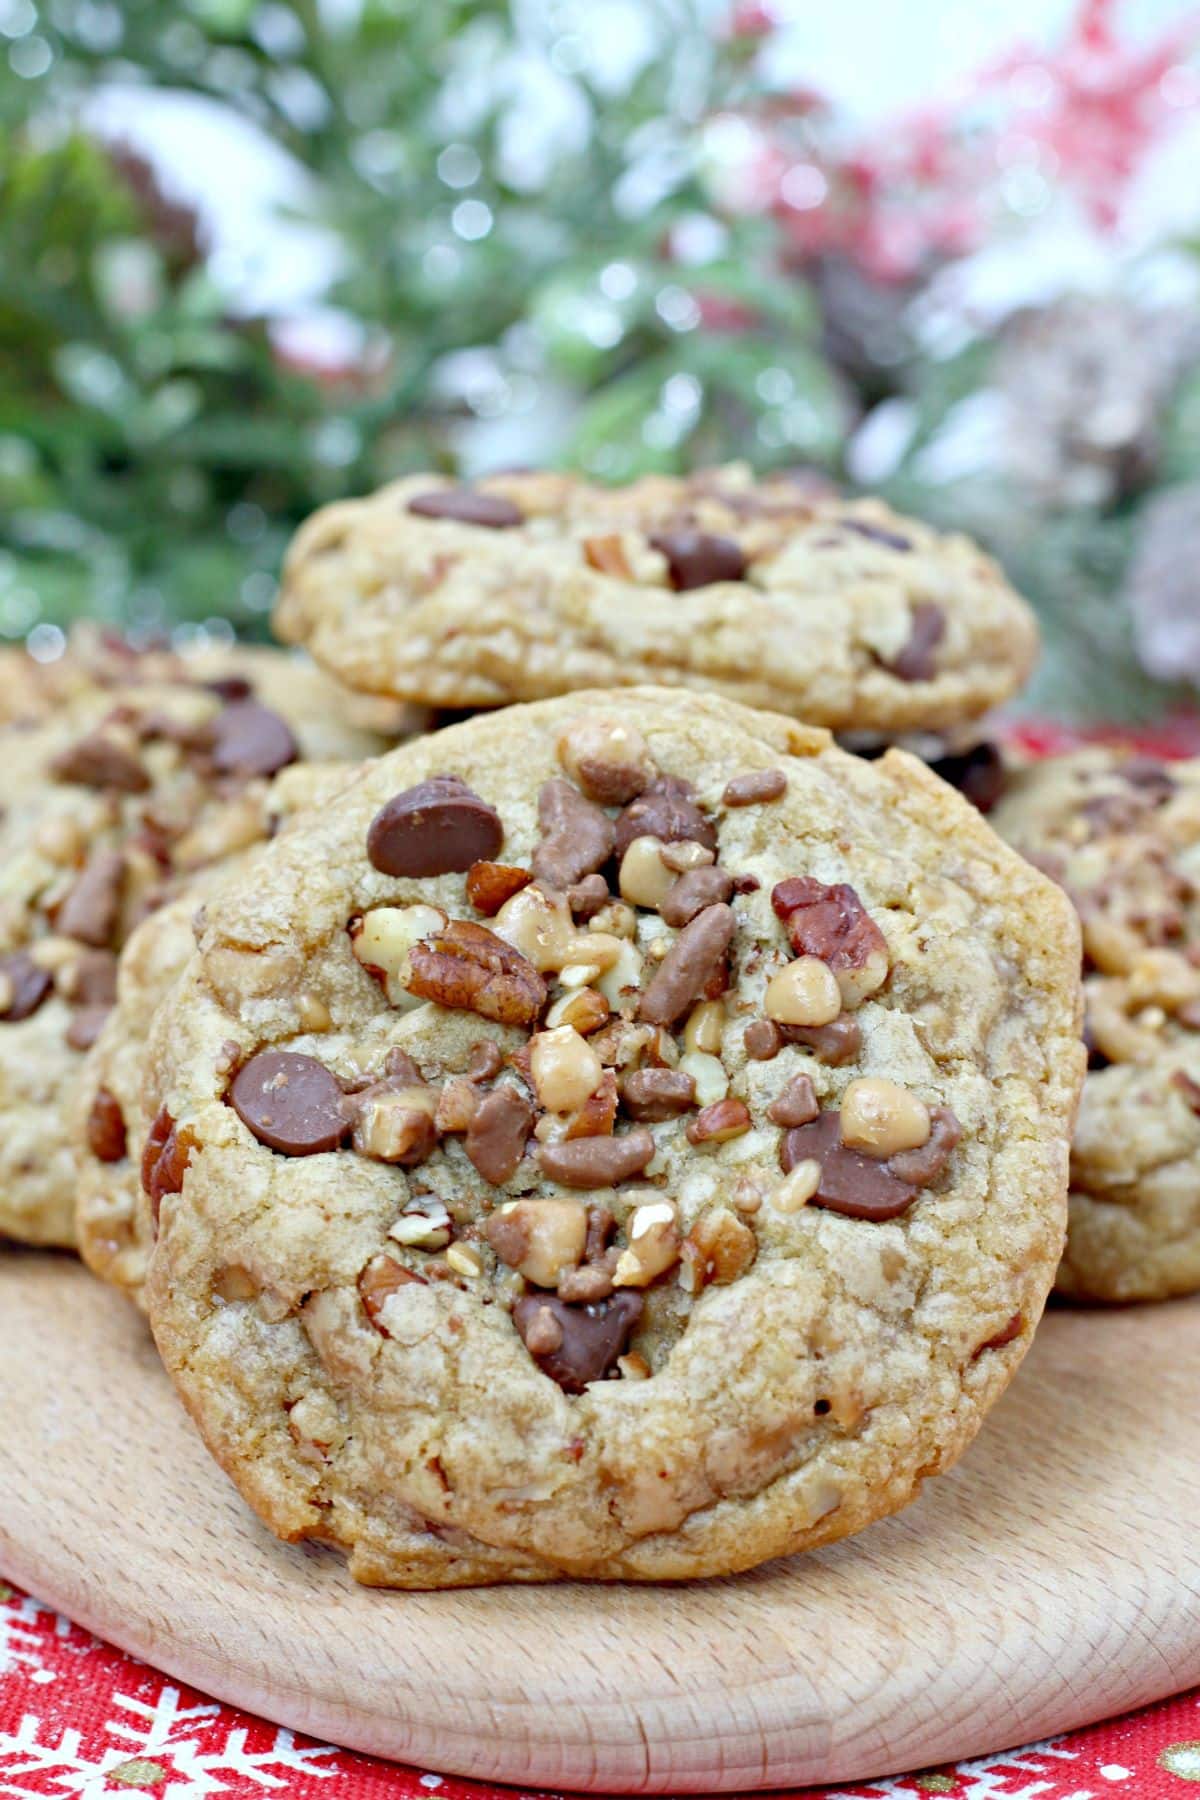 Up close image of one of the Chocolate Chip Toffee Pecan Cookies.